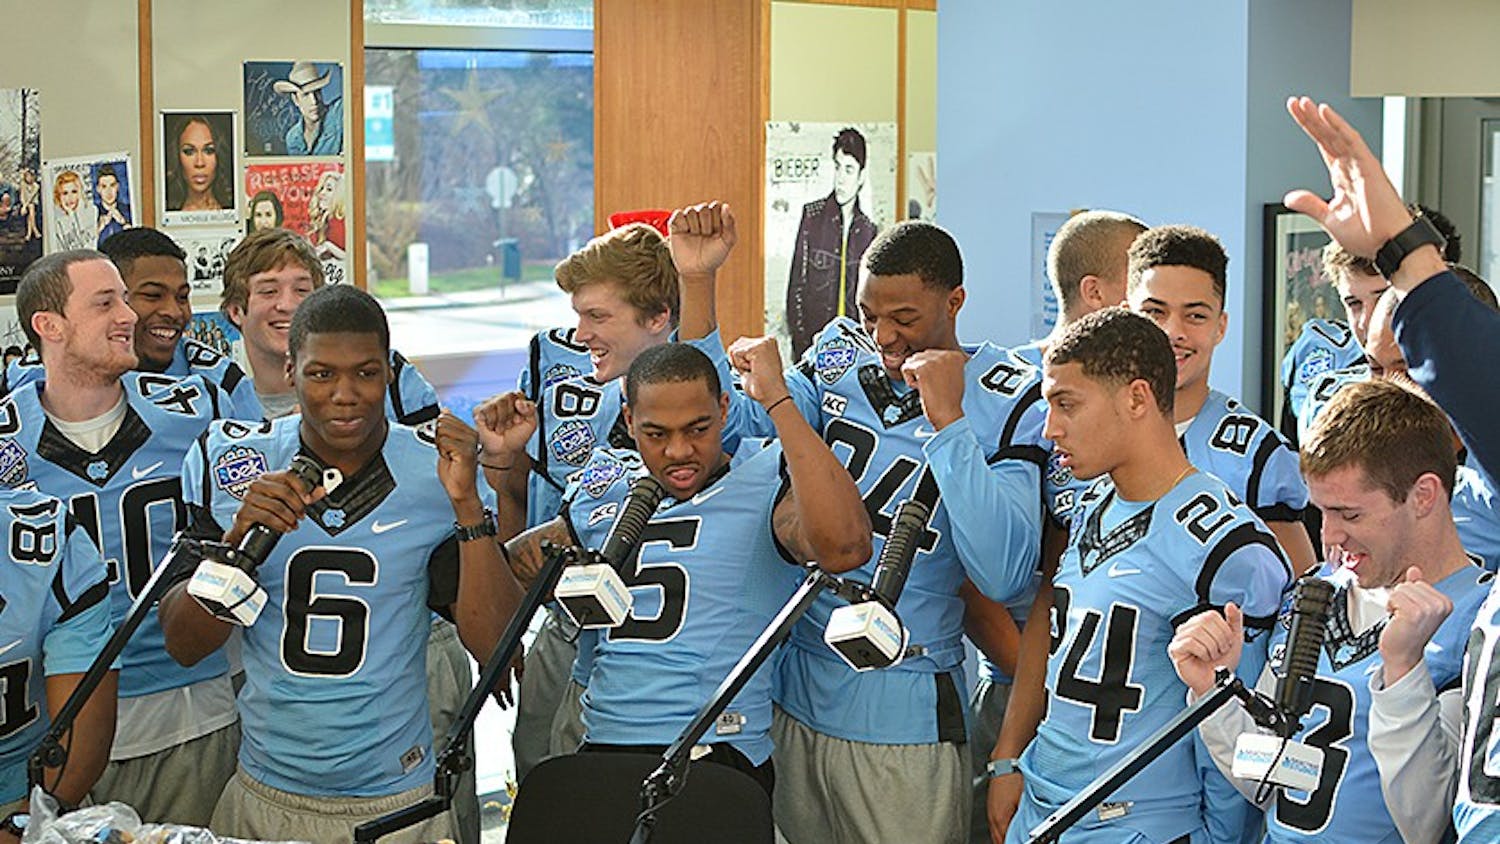 Members of the UNC football team visited Levine Children's Hospital to spread holiday cheer to ill children.